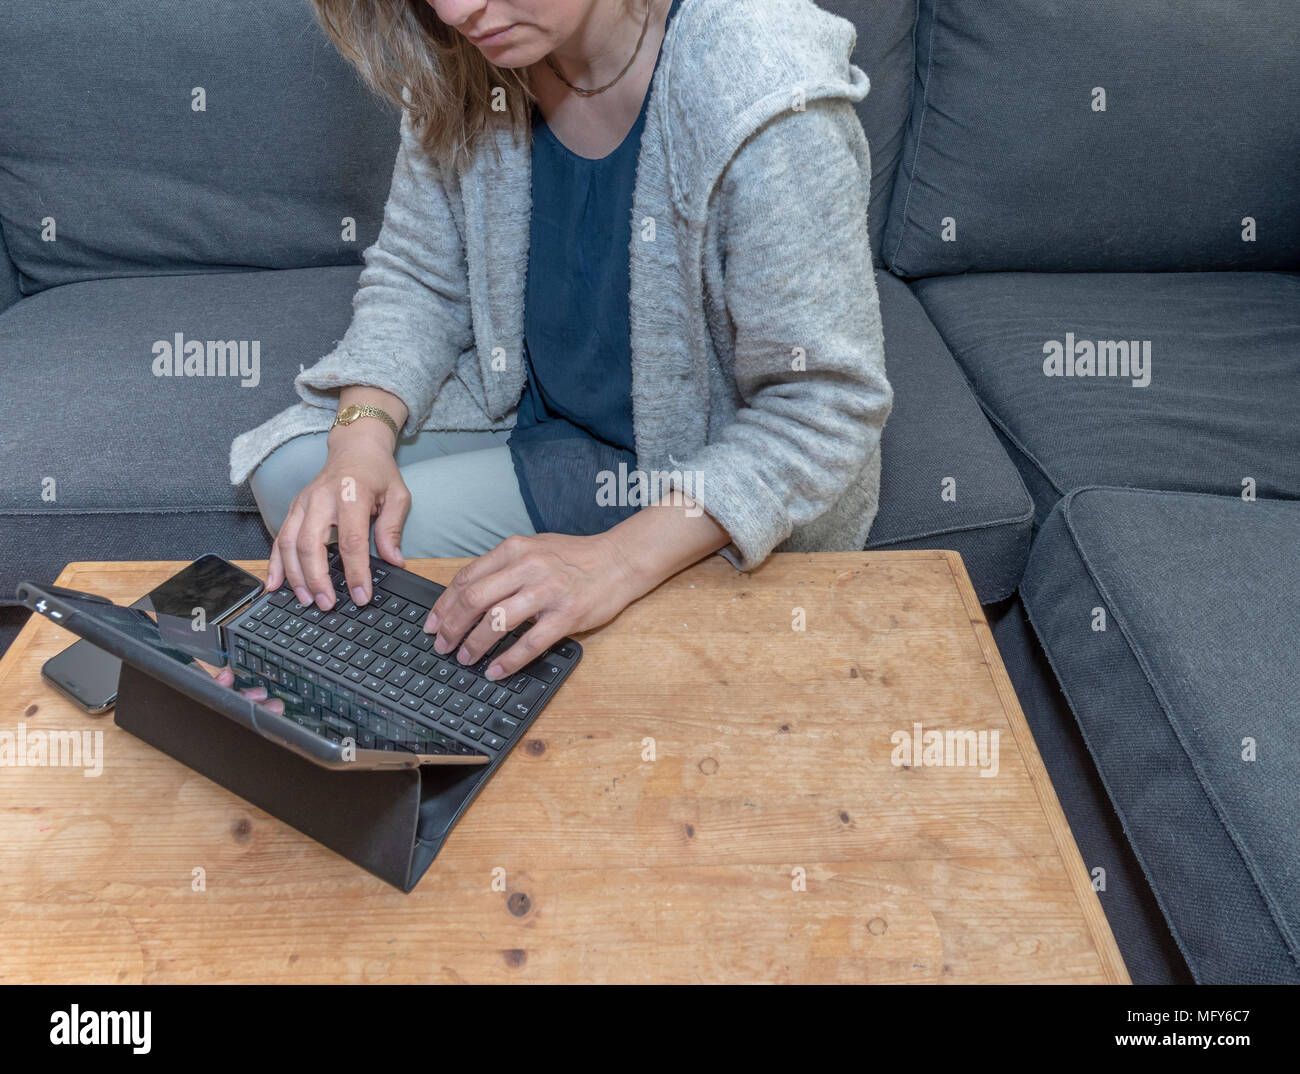 A middle aged woman at home using her laptop computer Stock Photo